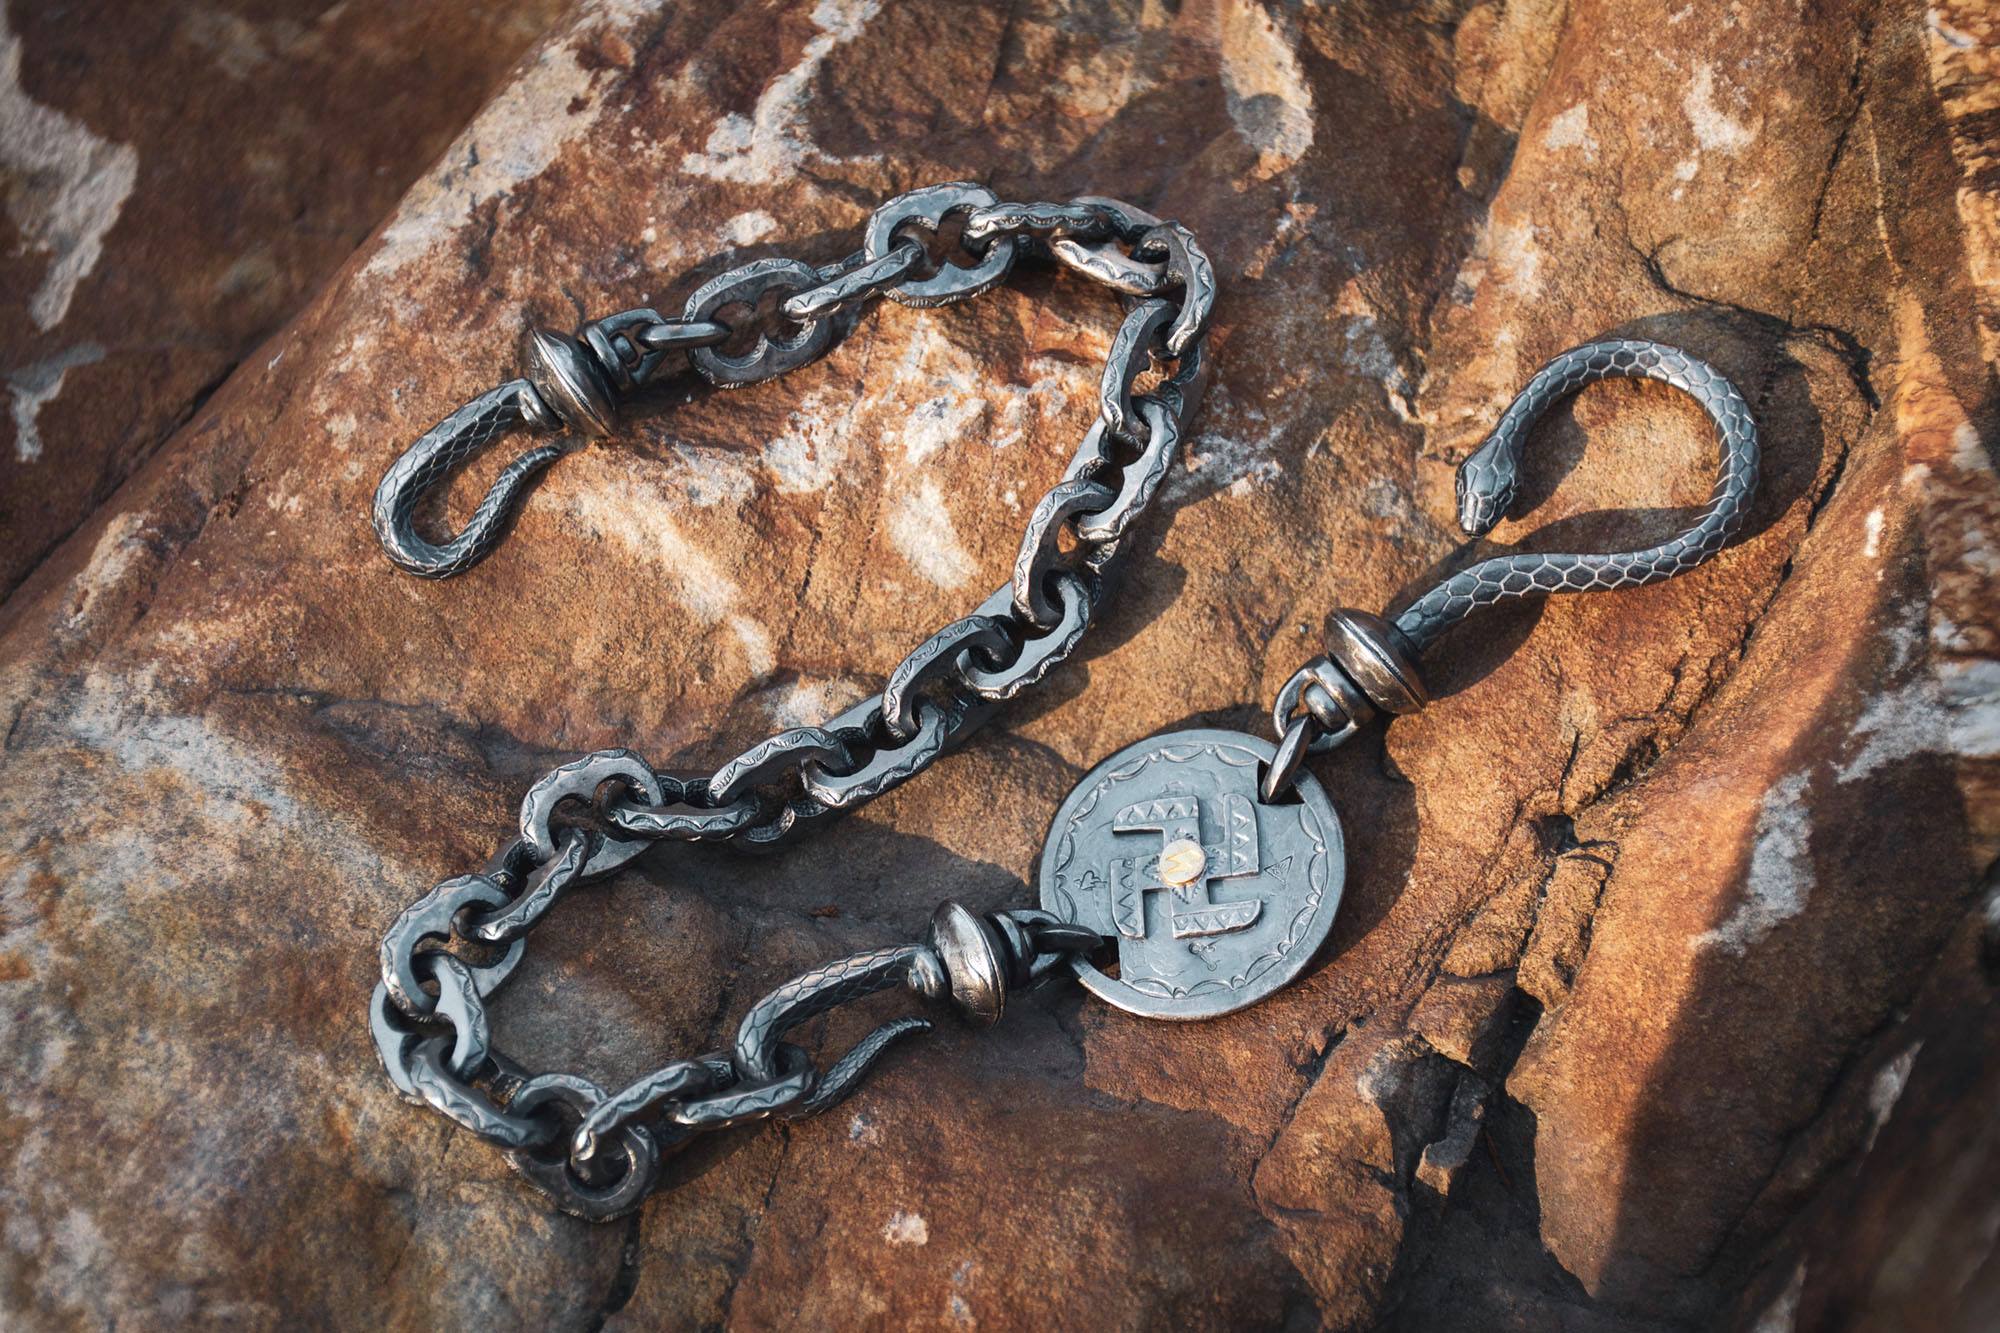 SLINGSHOT SWASTIKA WALLET CHAIN by LARRY SMITH - May club